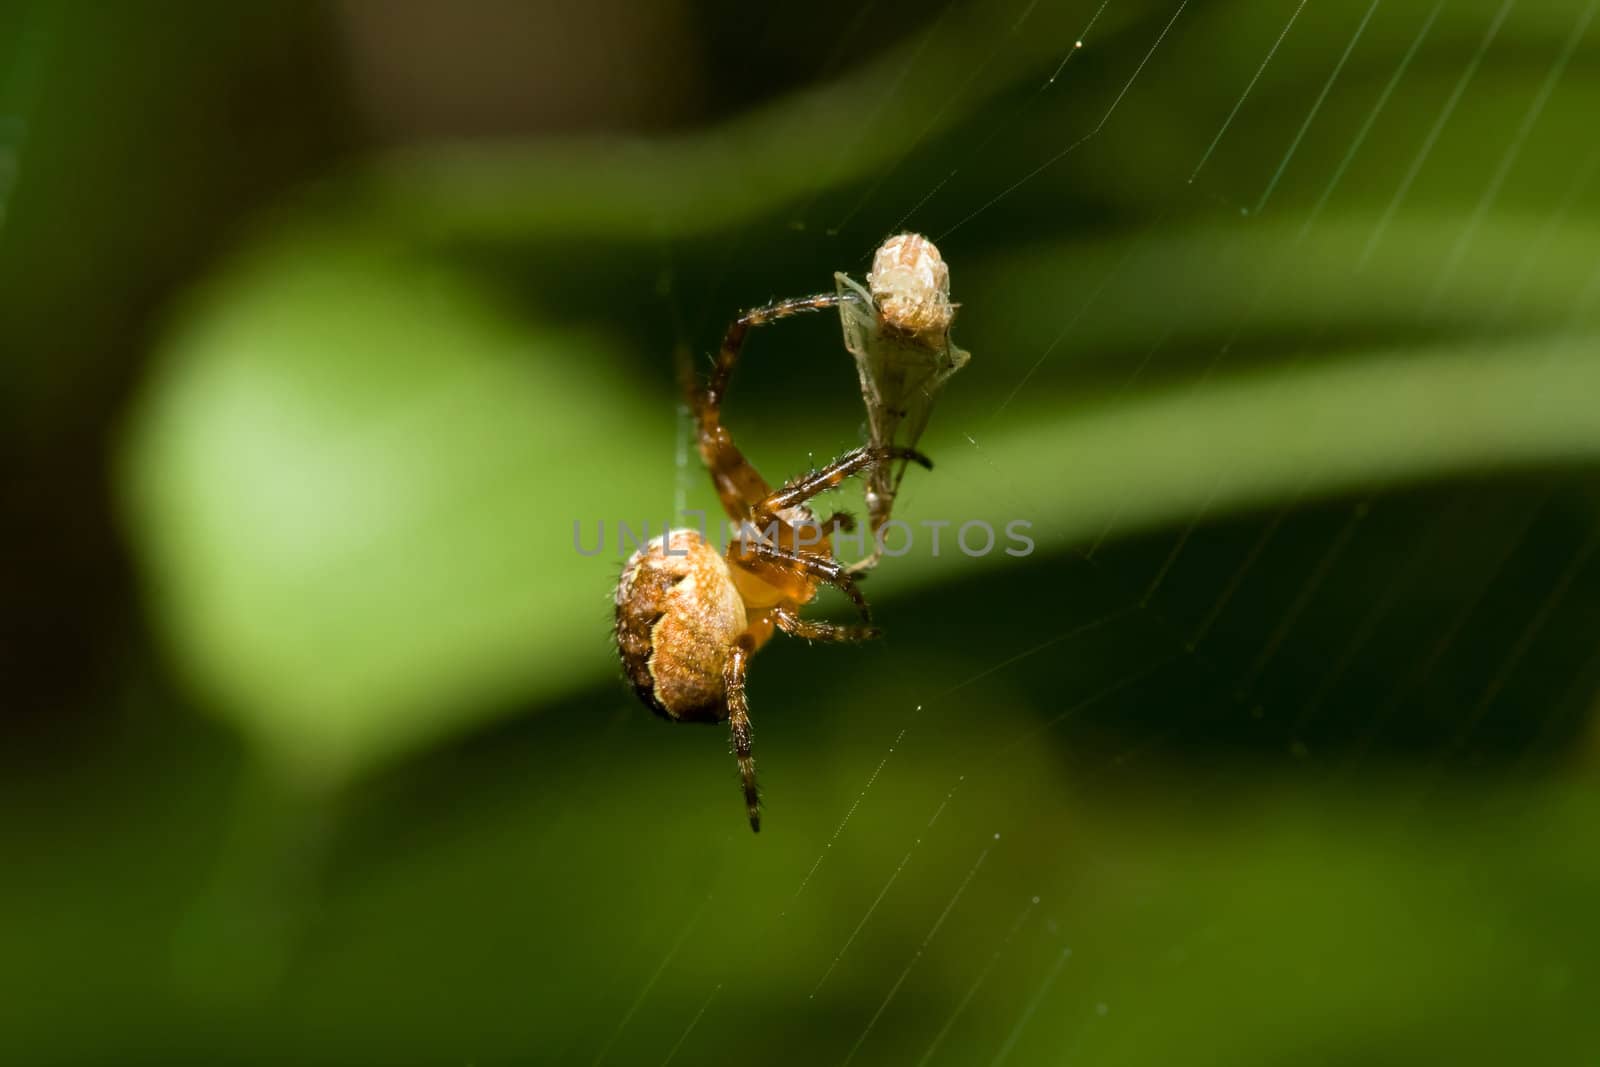 Female Cobweb Spider catching it's next meal.